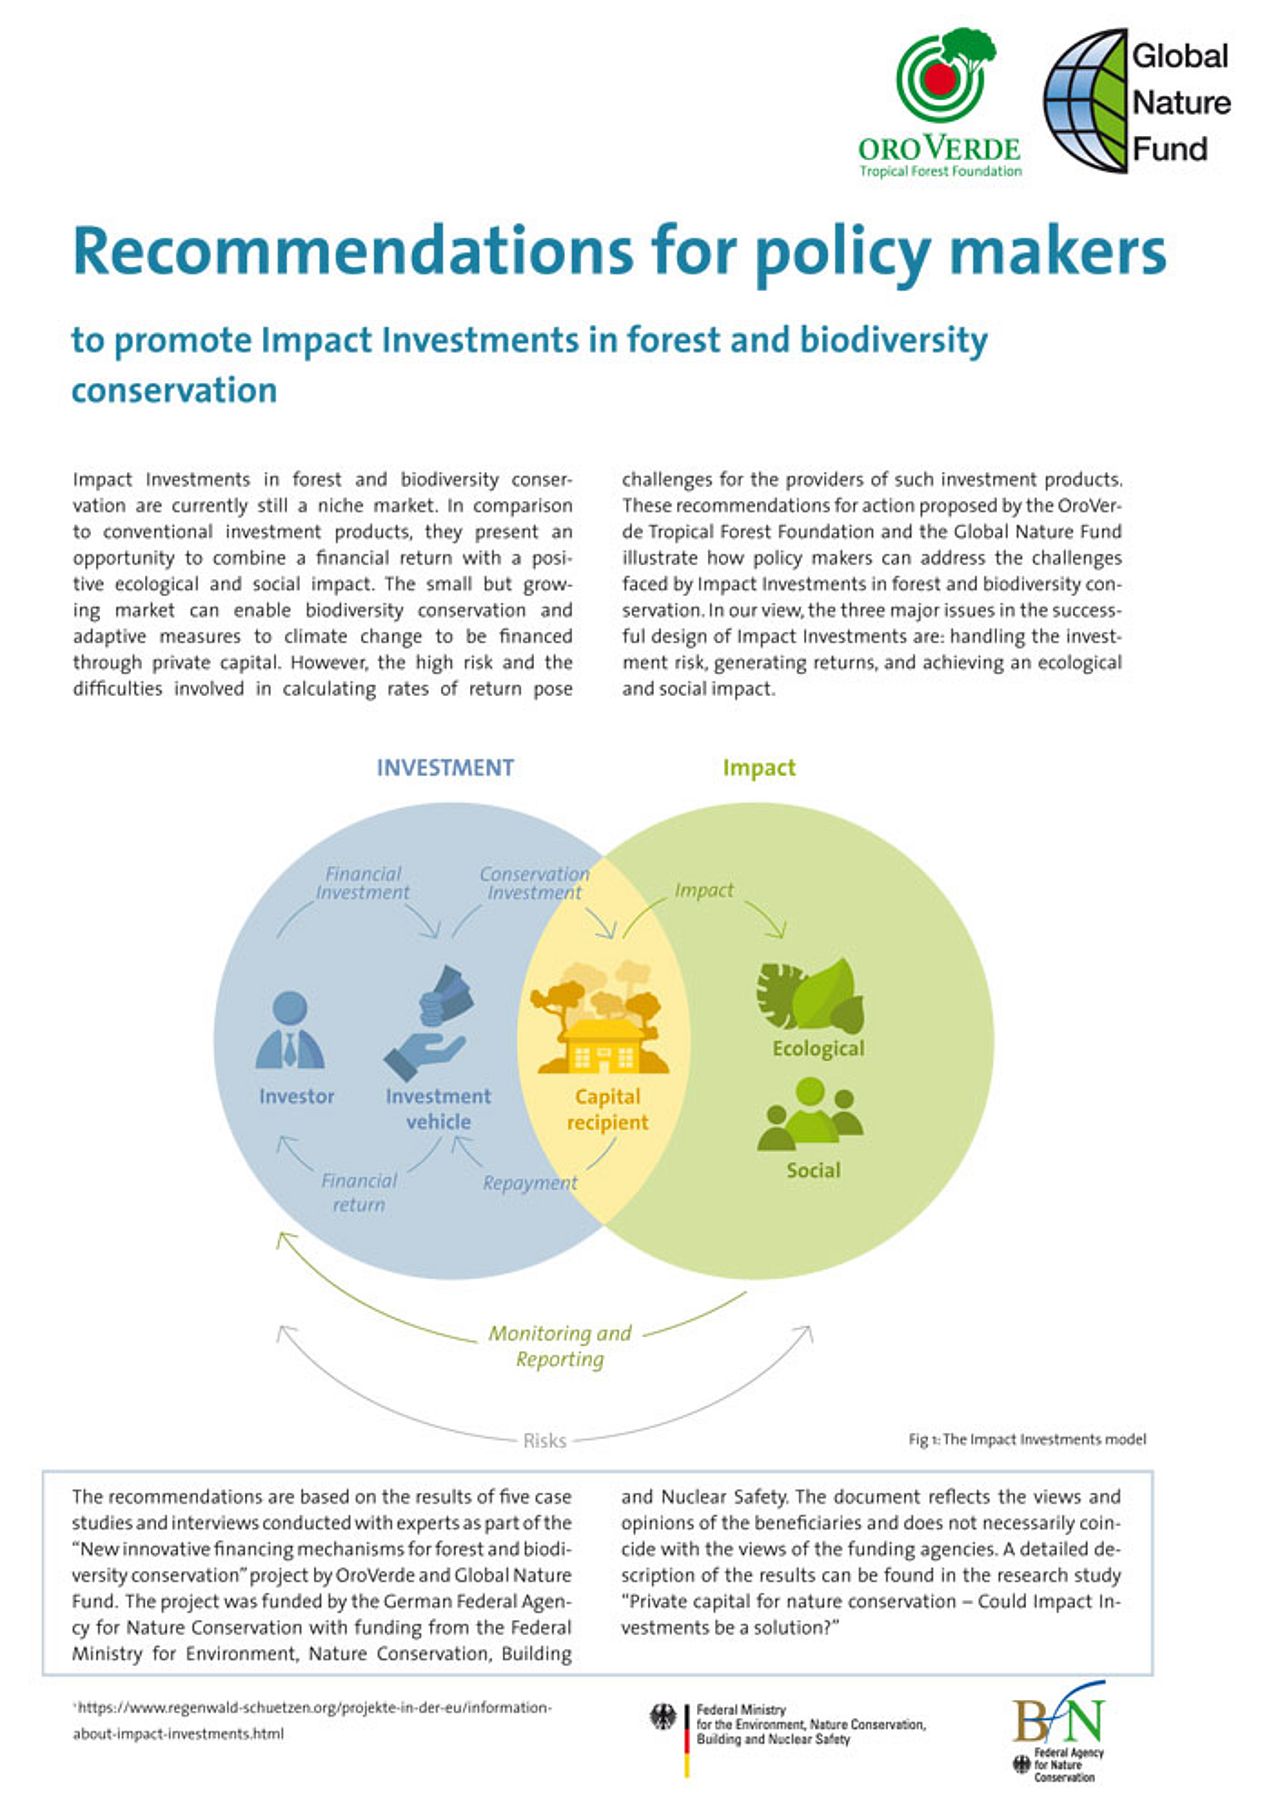 Impact-Investment: Recommendations